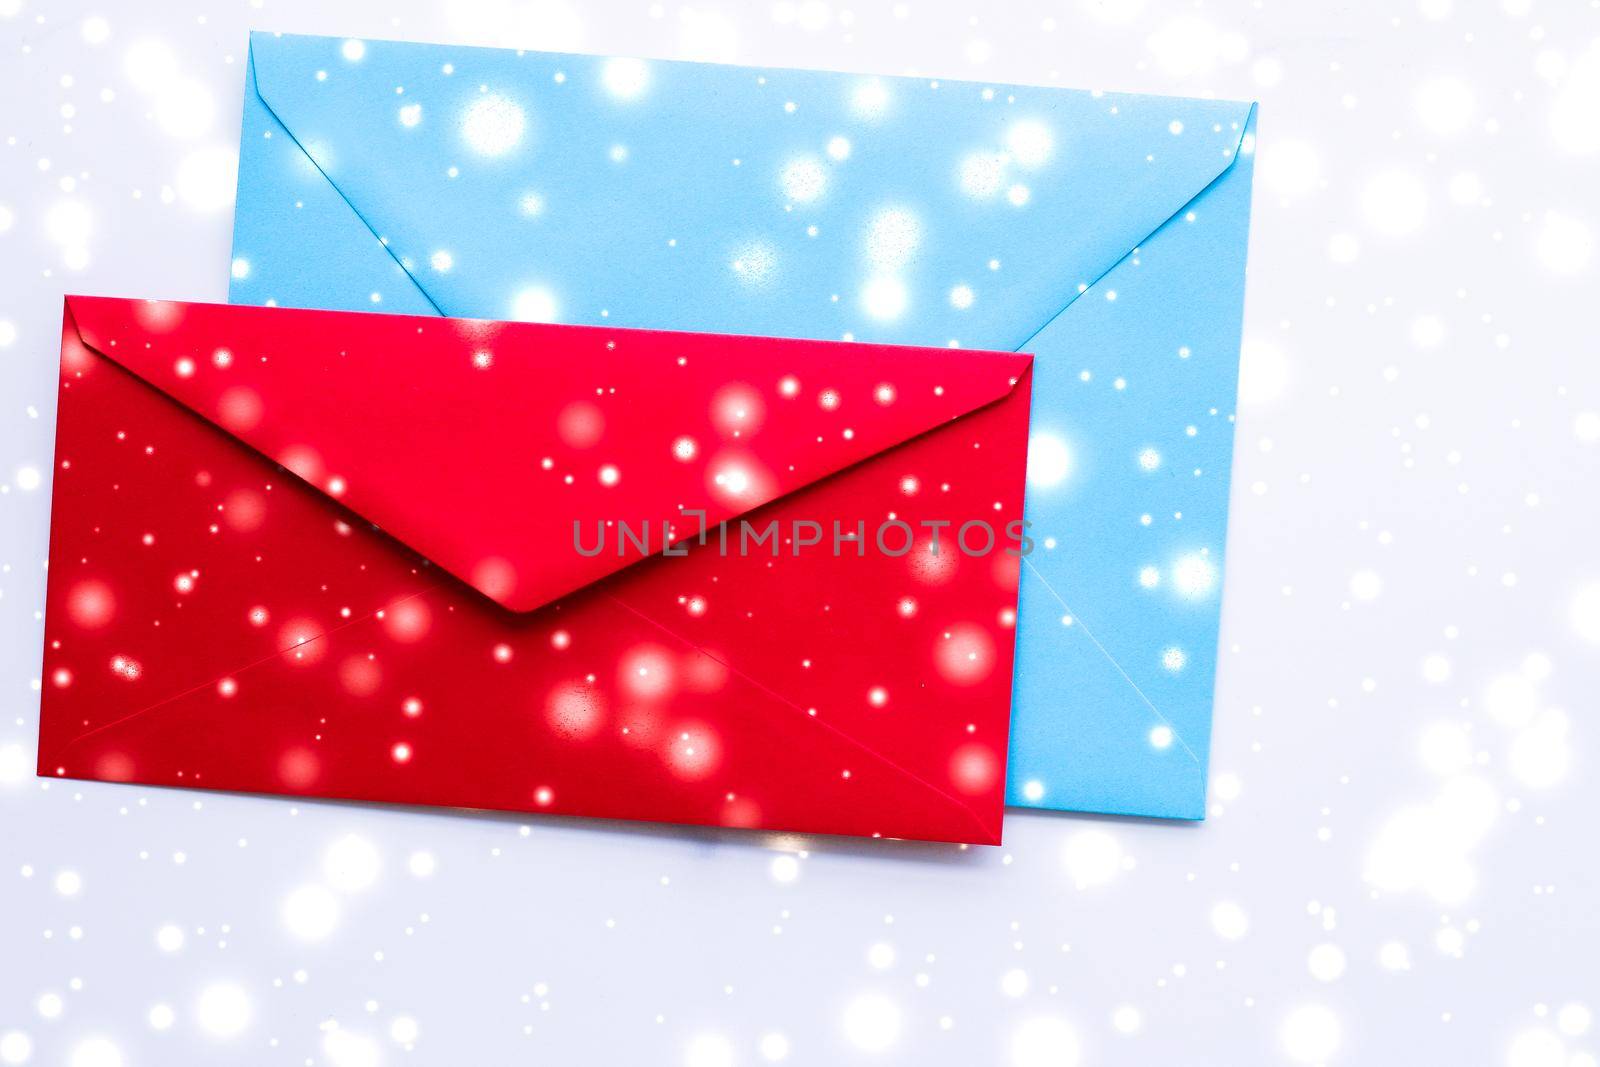 Greetings, postal service and online newsletter concept - Winter holiday blank paper envelopes on marble with shiny snow flatlay background, love letter or Christmas mail card design